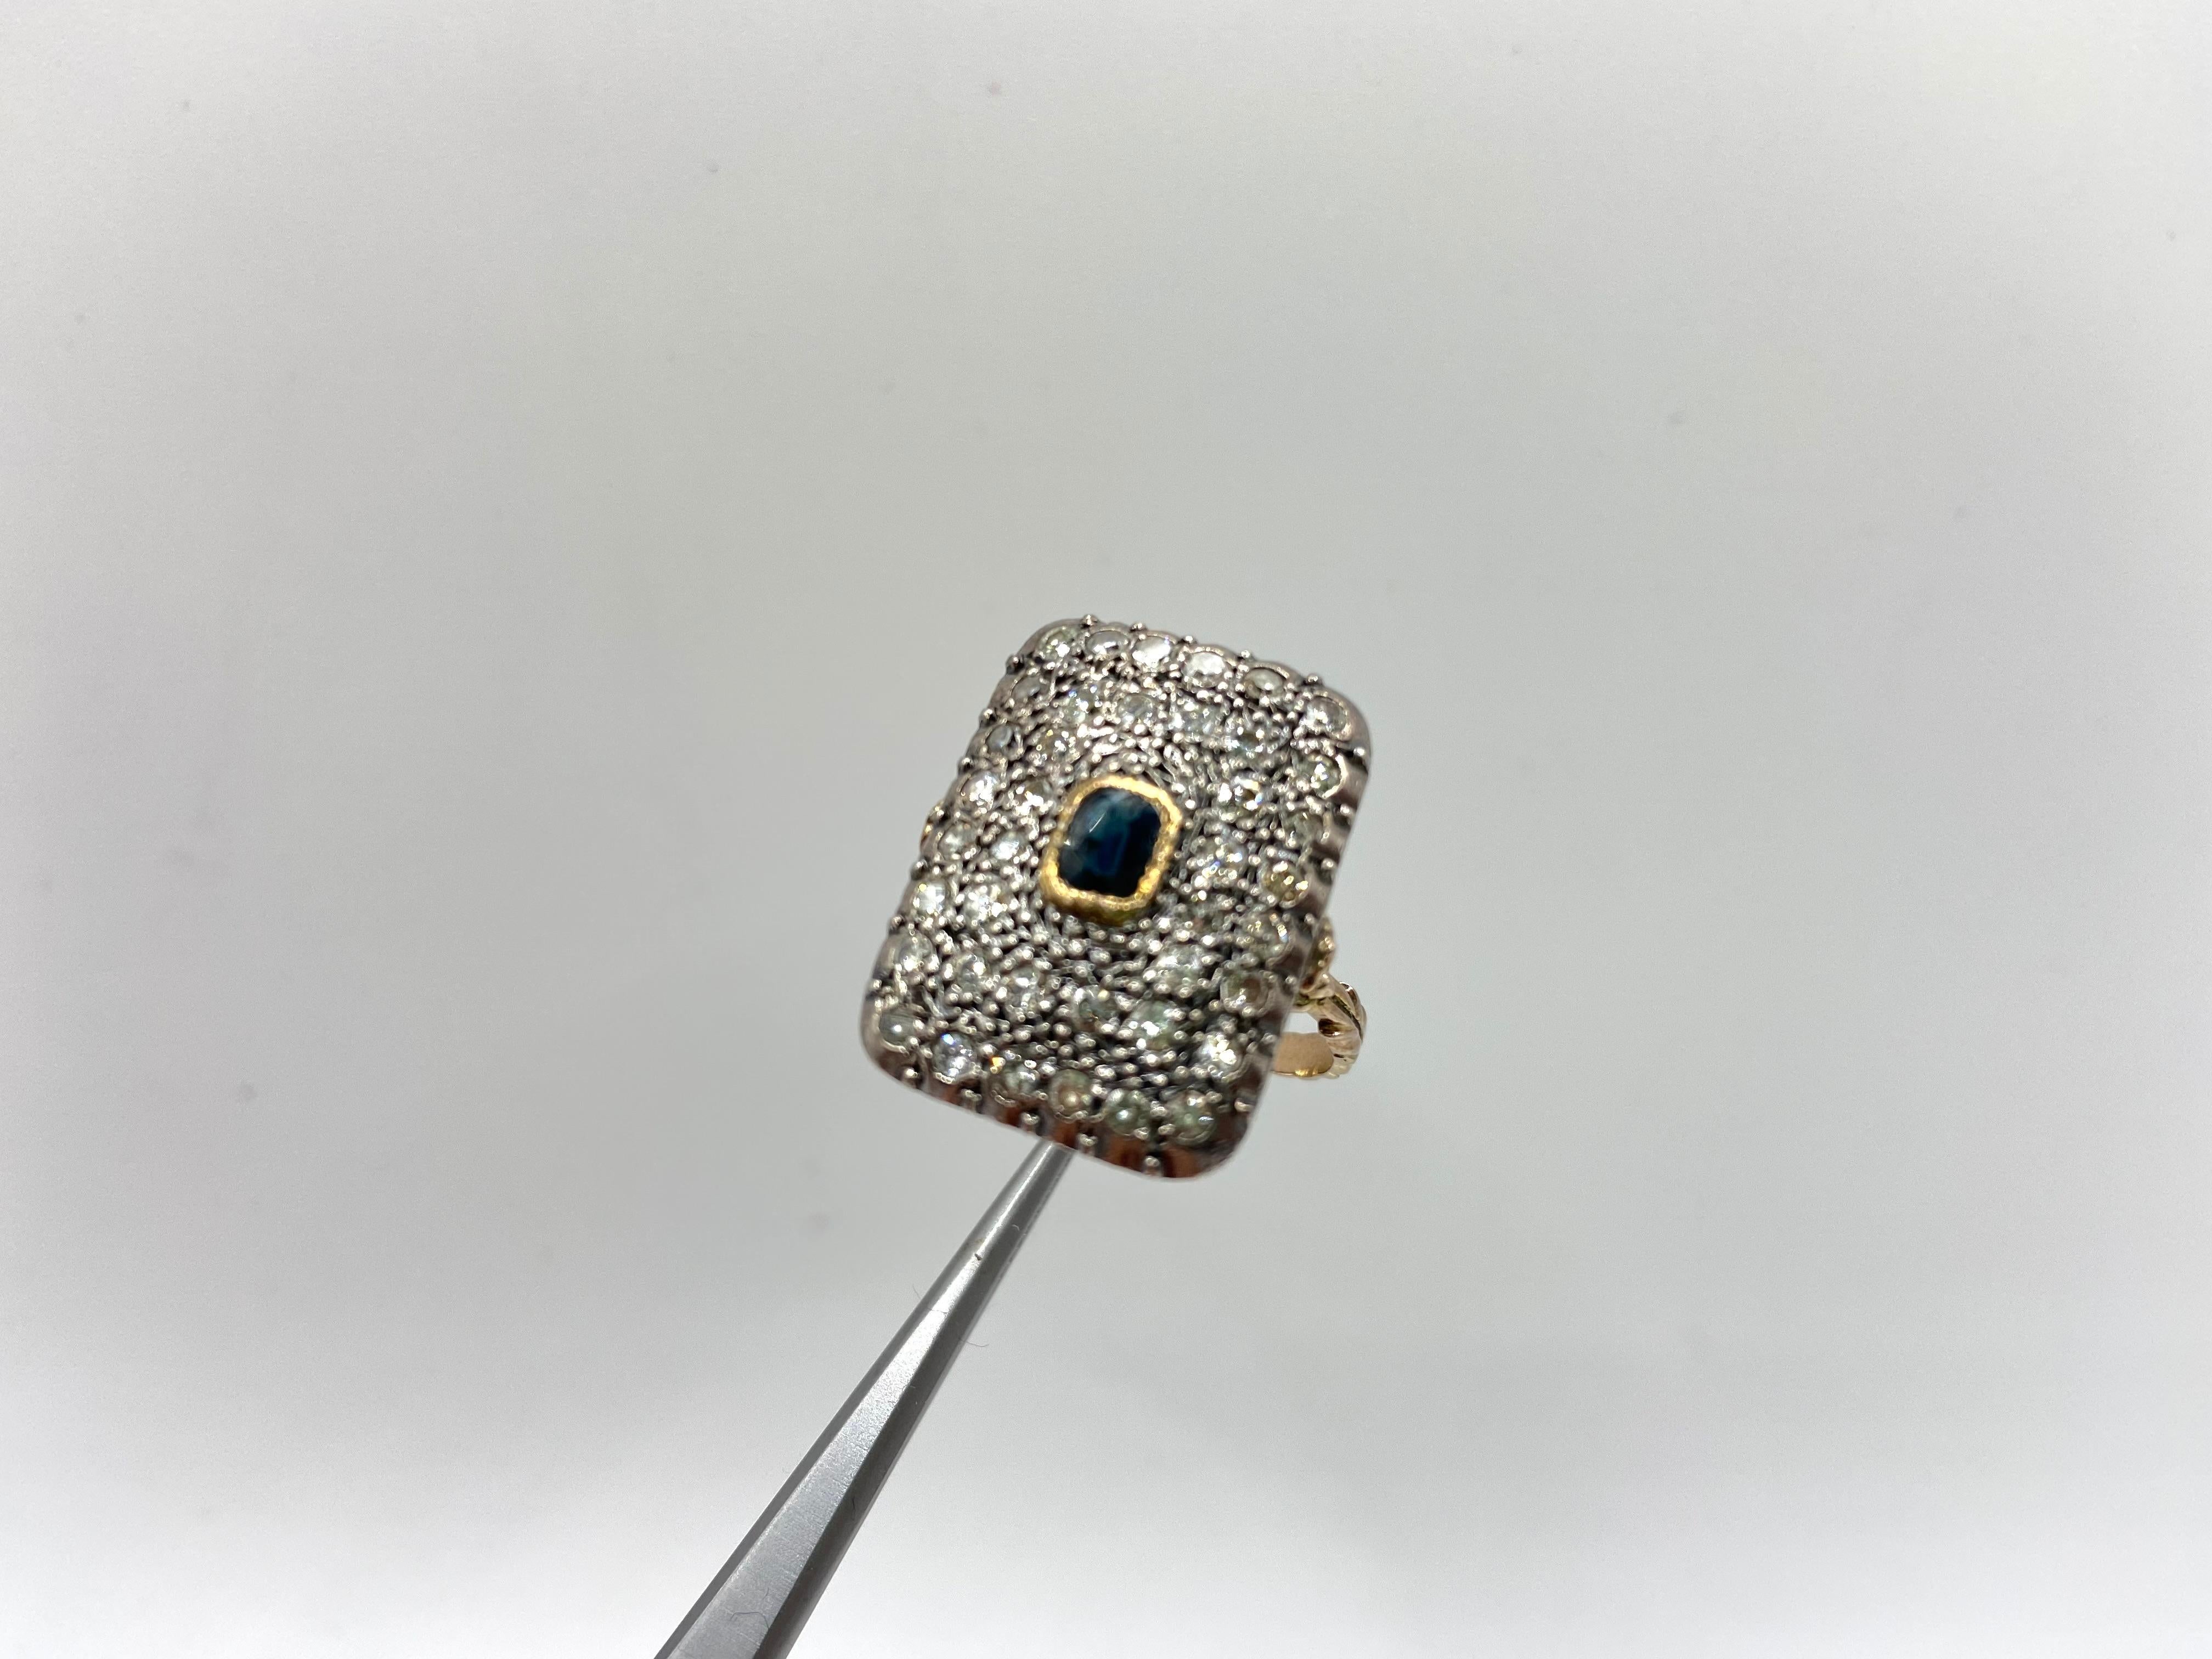 Antique Style Ring 9Kt Gold, Silver Cup, Sapphire and Diamonds. It weighs 6 grams and measures 19 (I can have it modified by a trusted craftsman at no additional cost). At the center a natural Sapphire measuring 6 mm by 4 mm. Set Diamonds cut